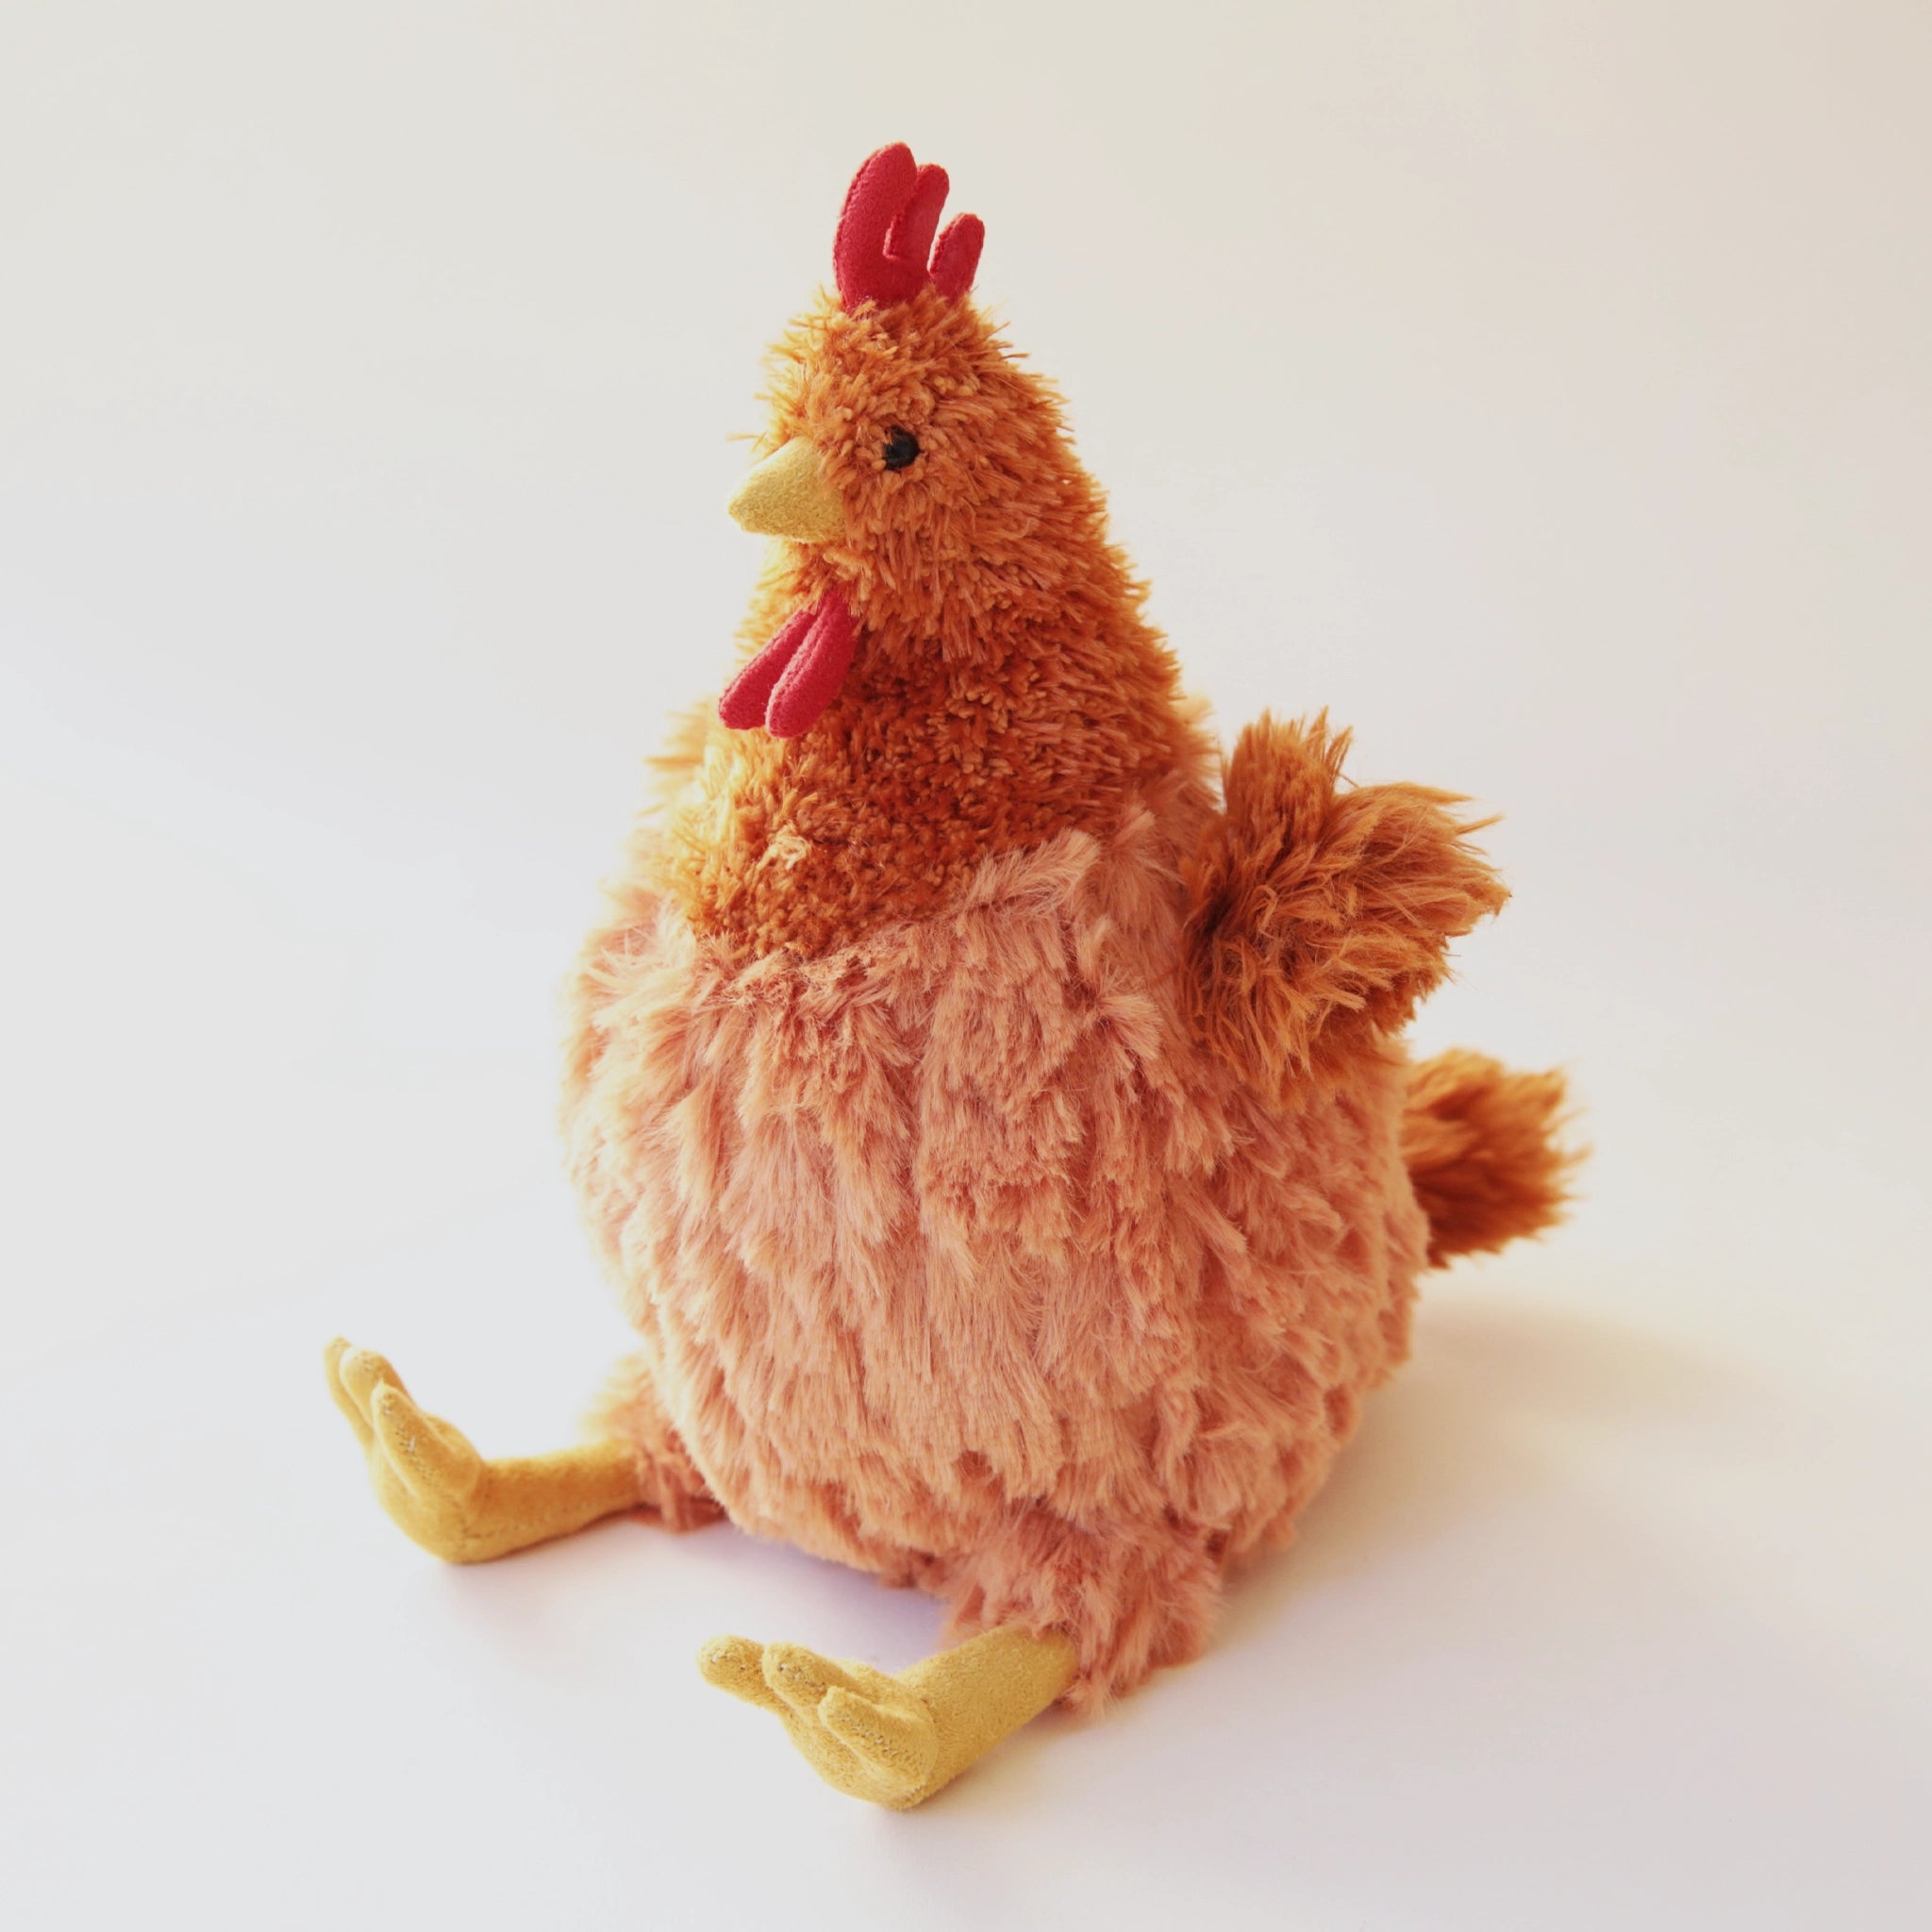 A chicken stuffed animal with vibrant orange and fur and red and yellow detailing. It has a yellow beak and yellow feet.